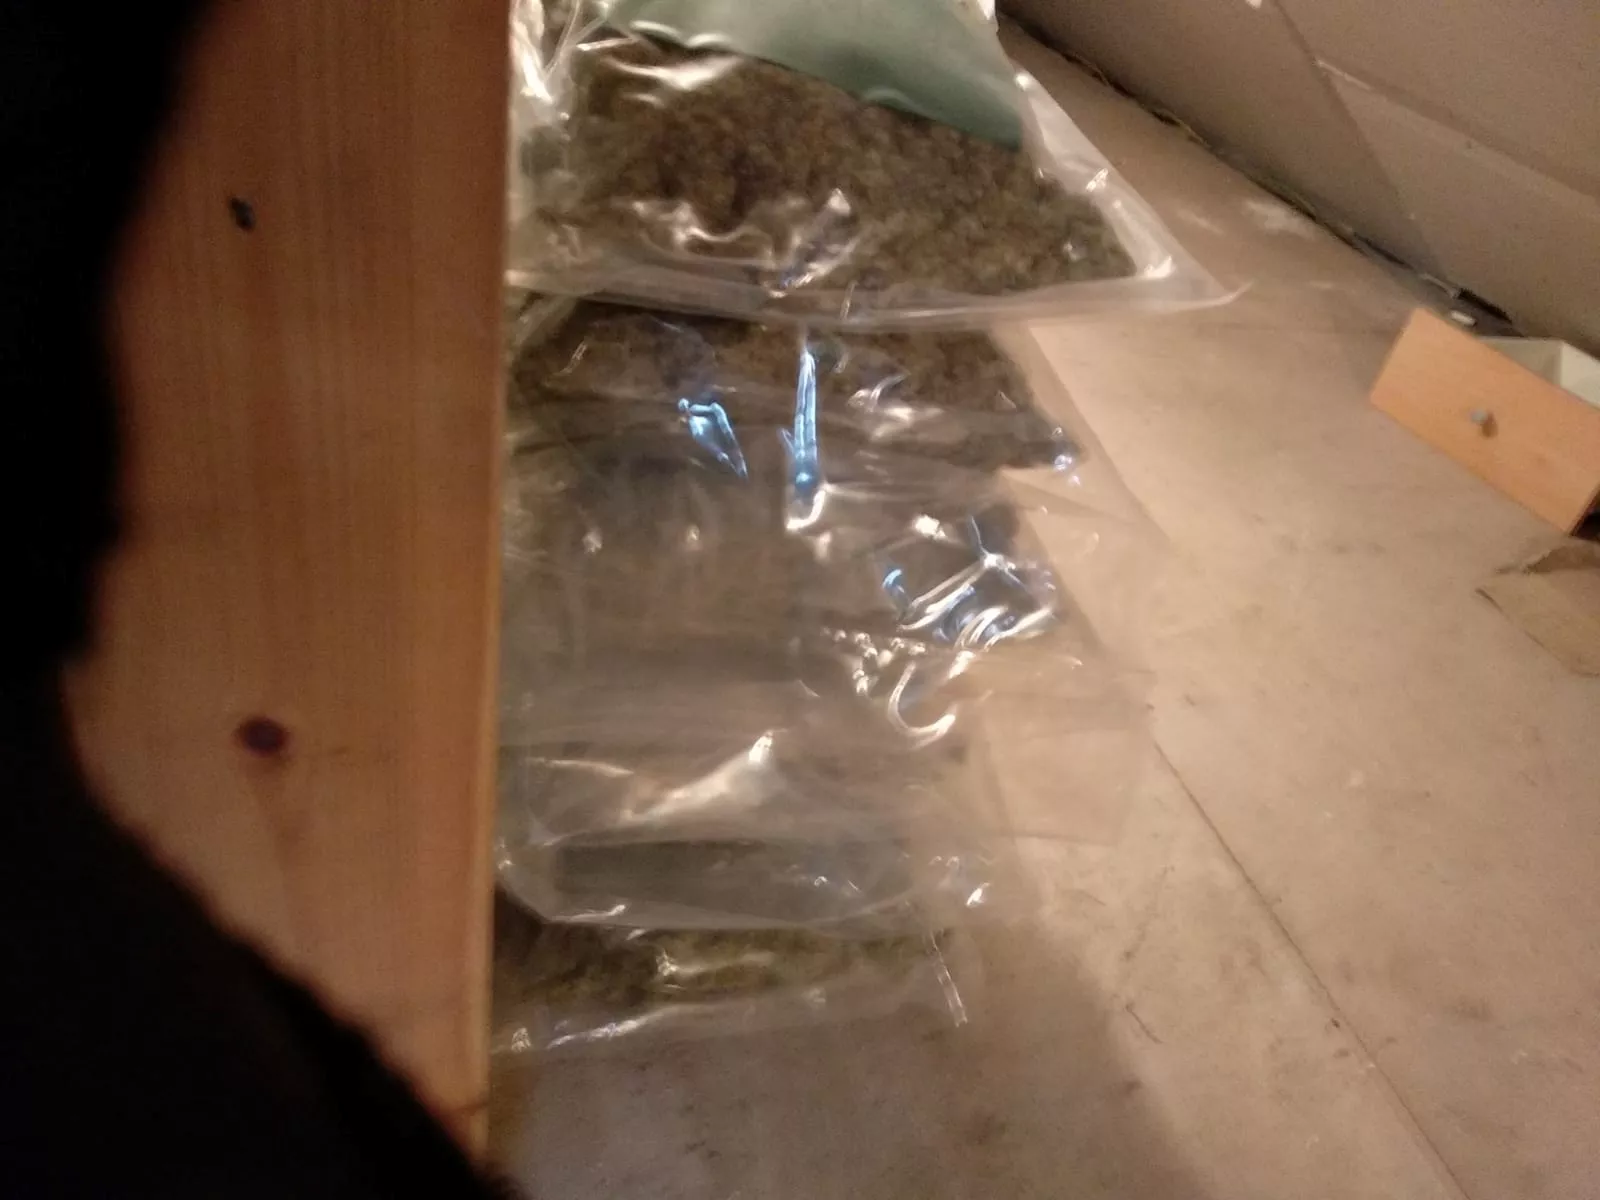 Gardaí seize hand grenades and €2.5m of cannabis in Meath